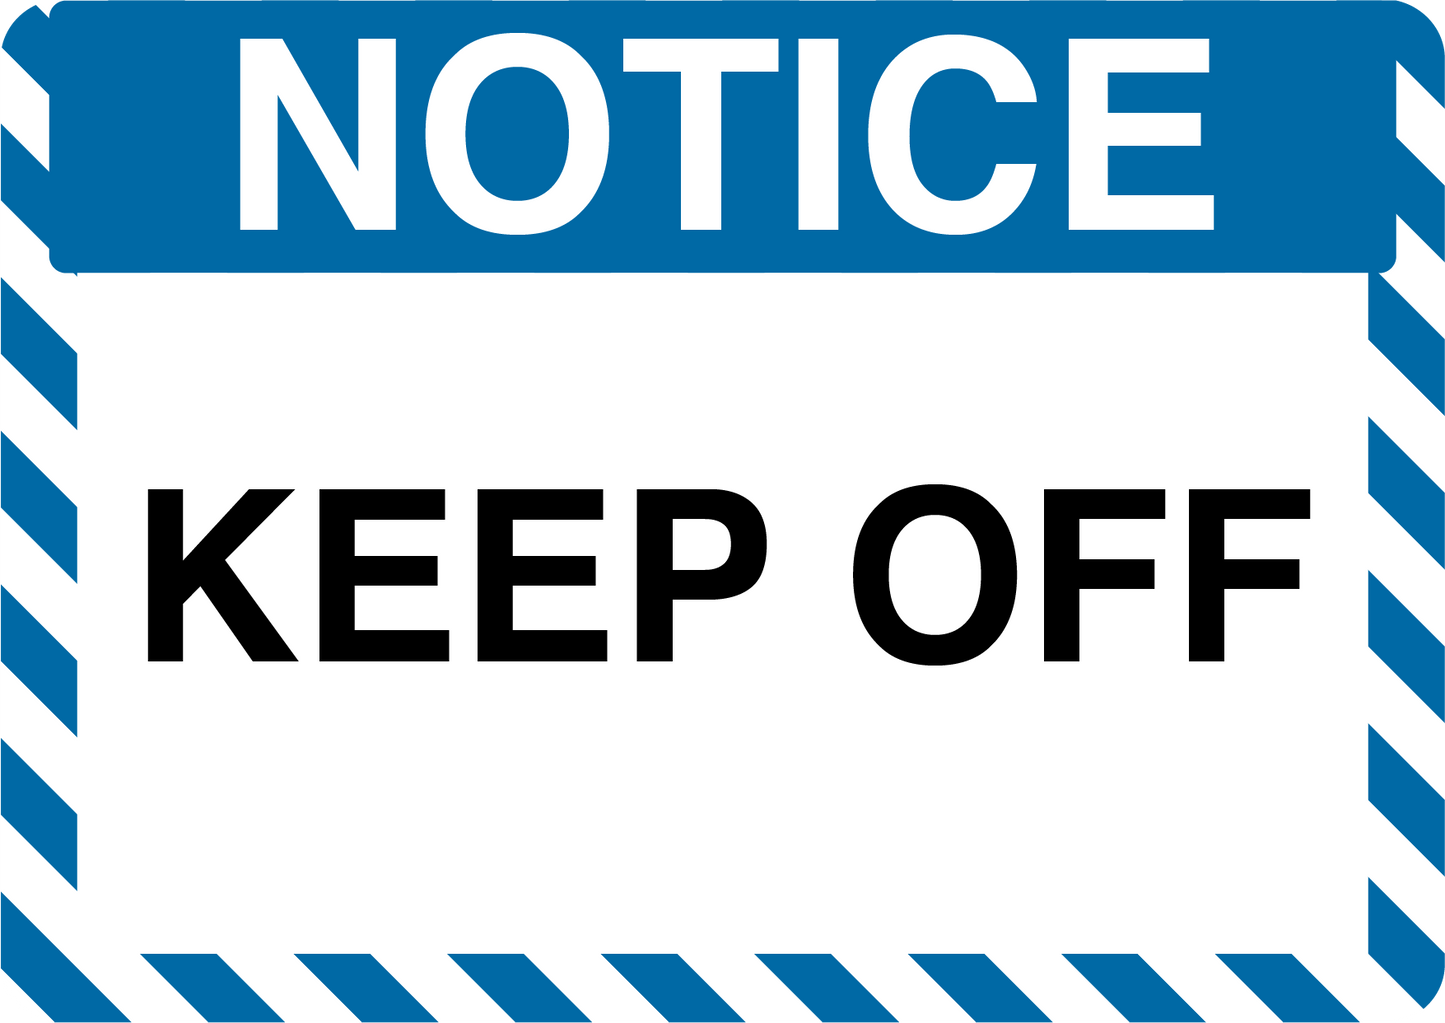 Notice "Keep Off" Durable Matte Laminated Vinyl Floor Sign- Various Sizes Available